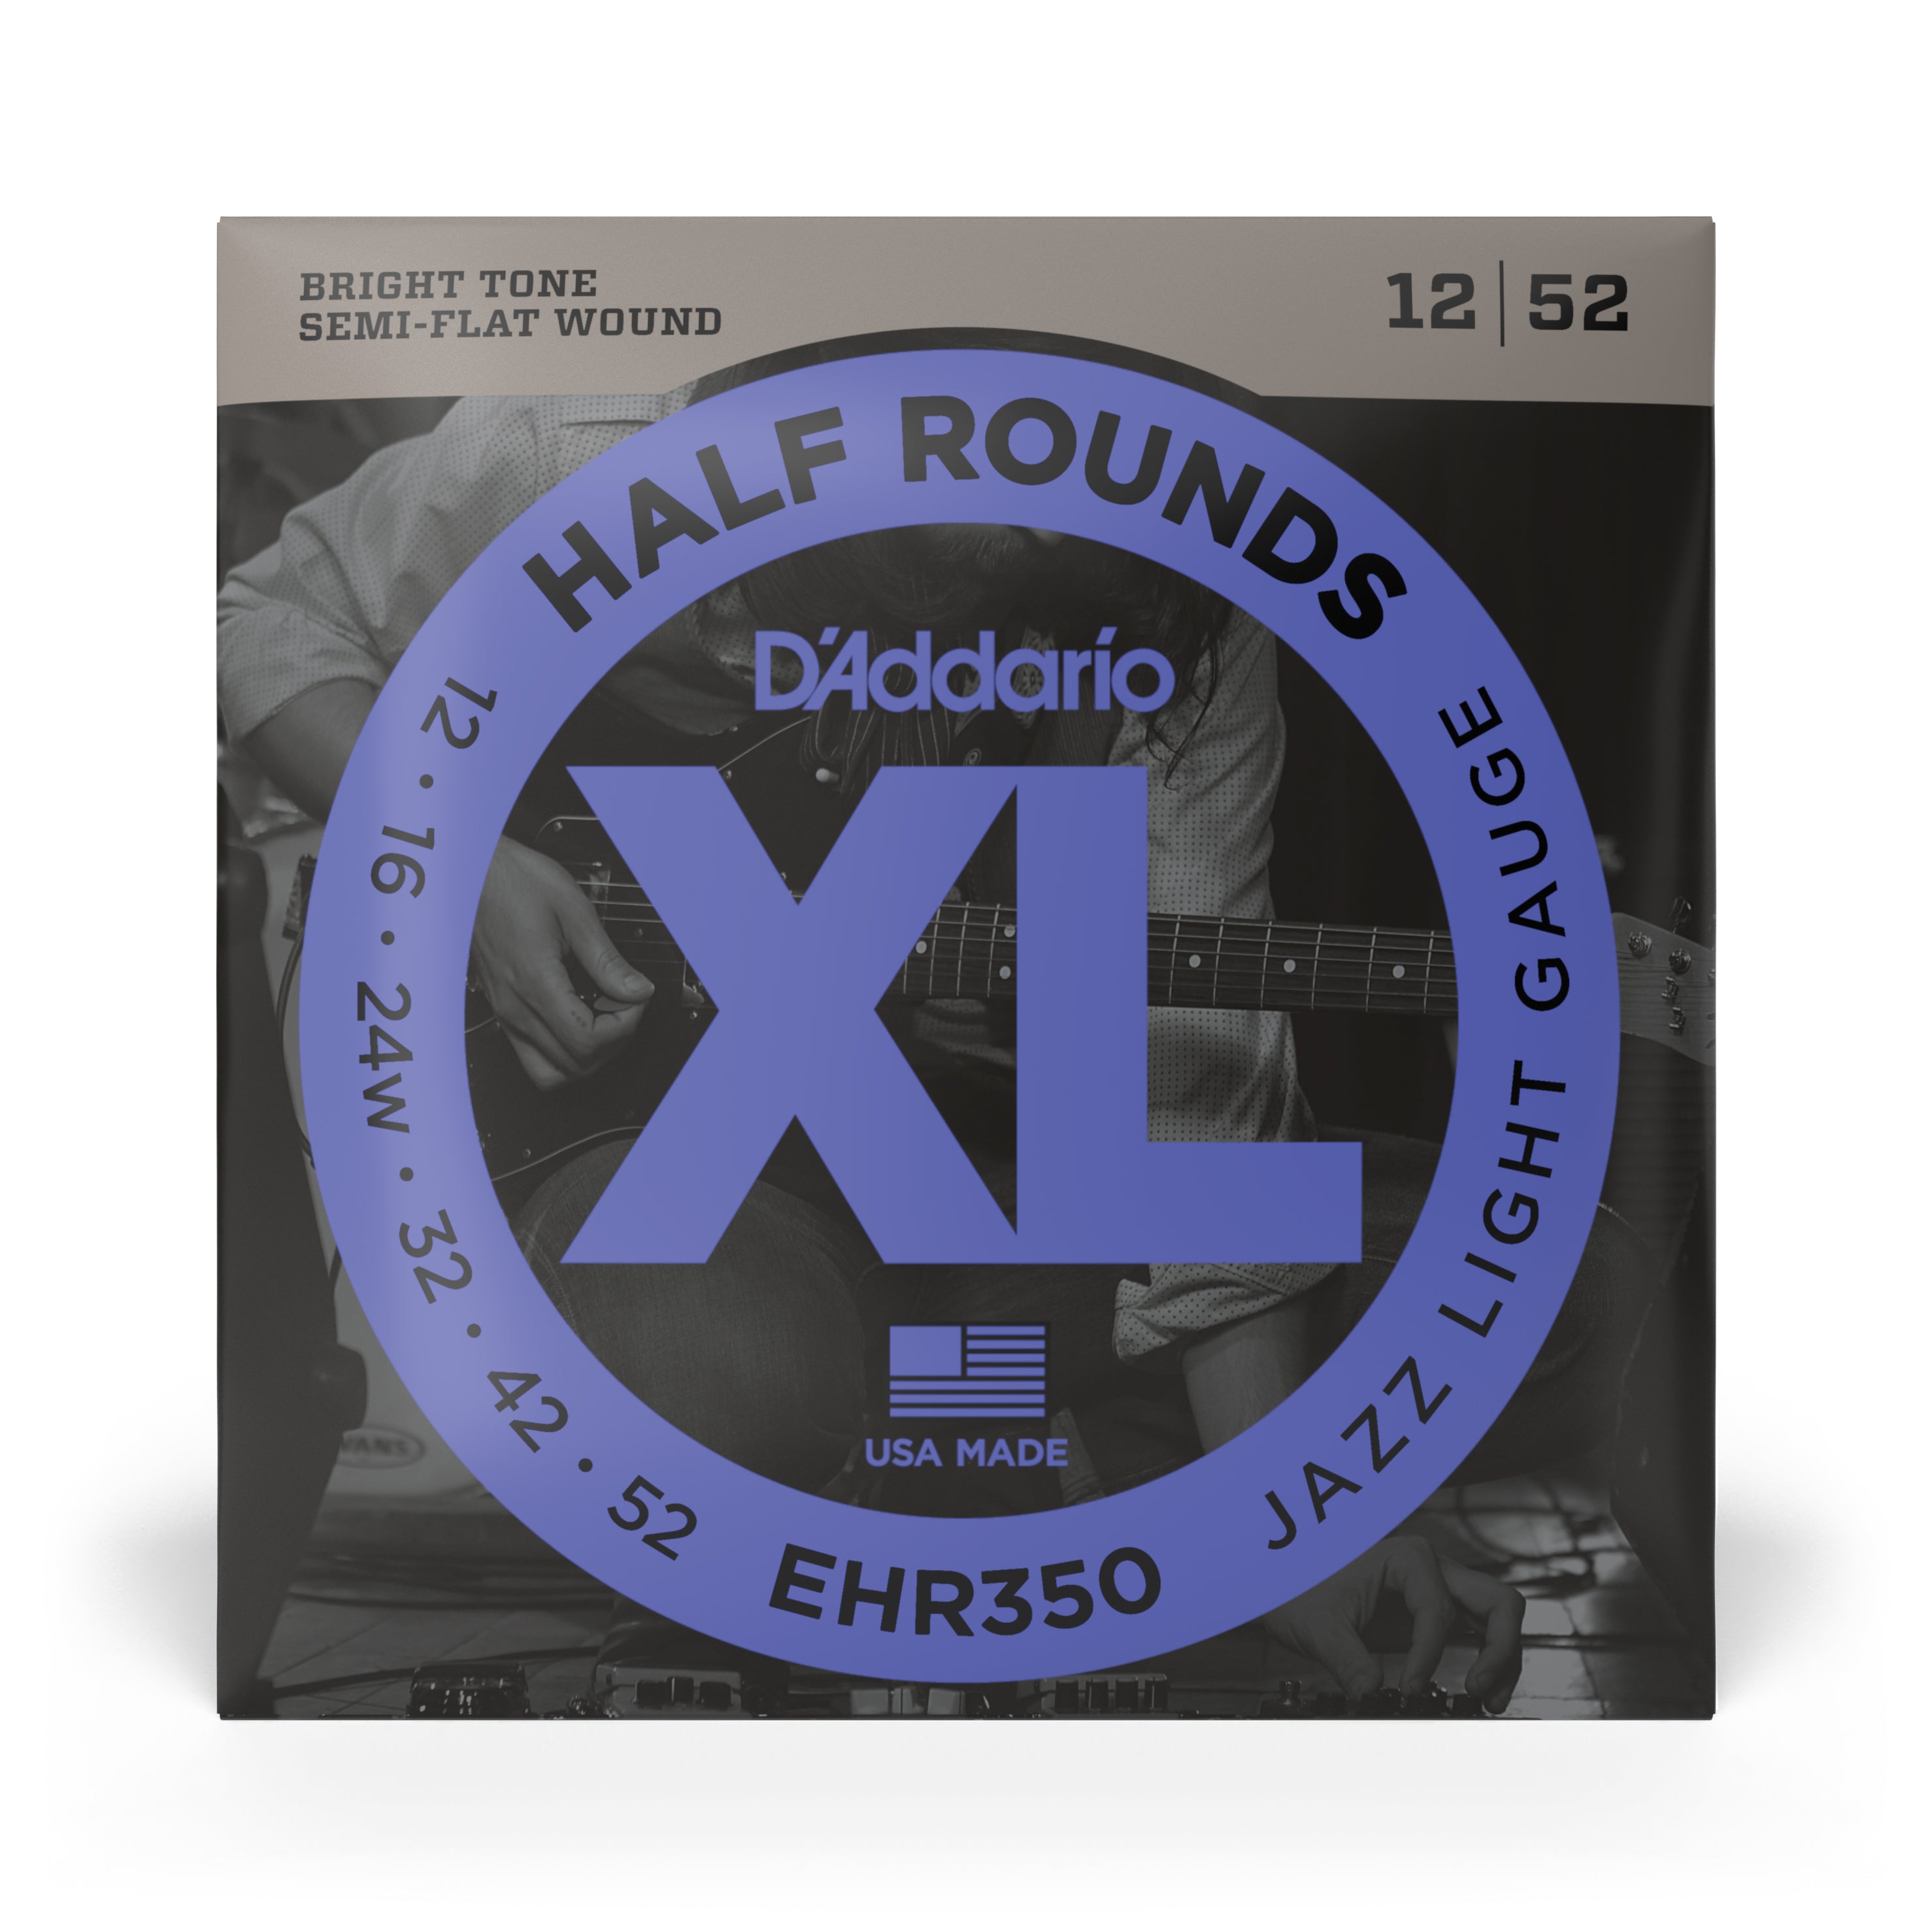 D'Addario Half Rounds Stainless Steel 12-52 Electric Guitar Strings, Jazz Light